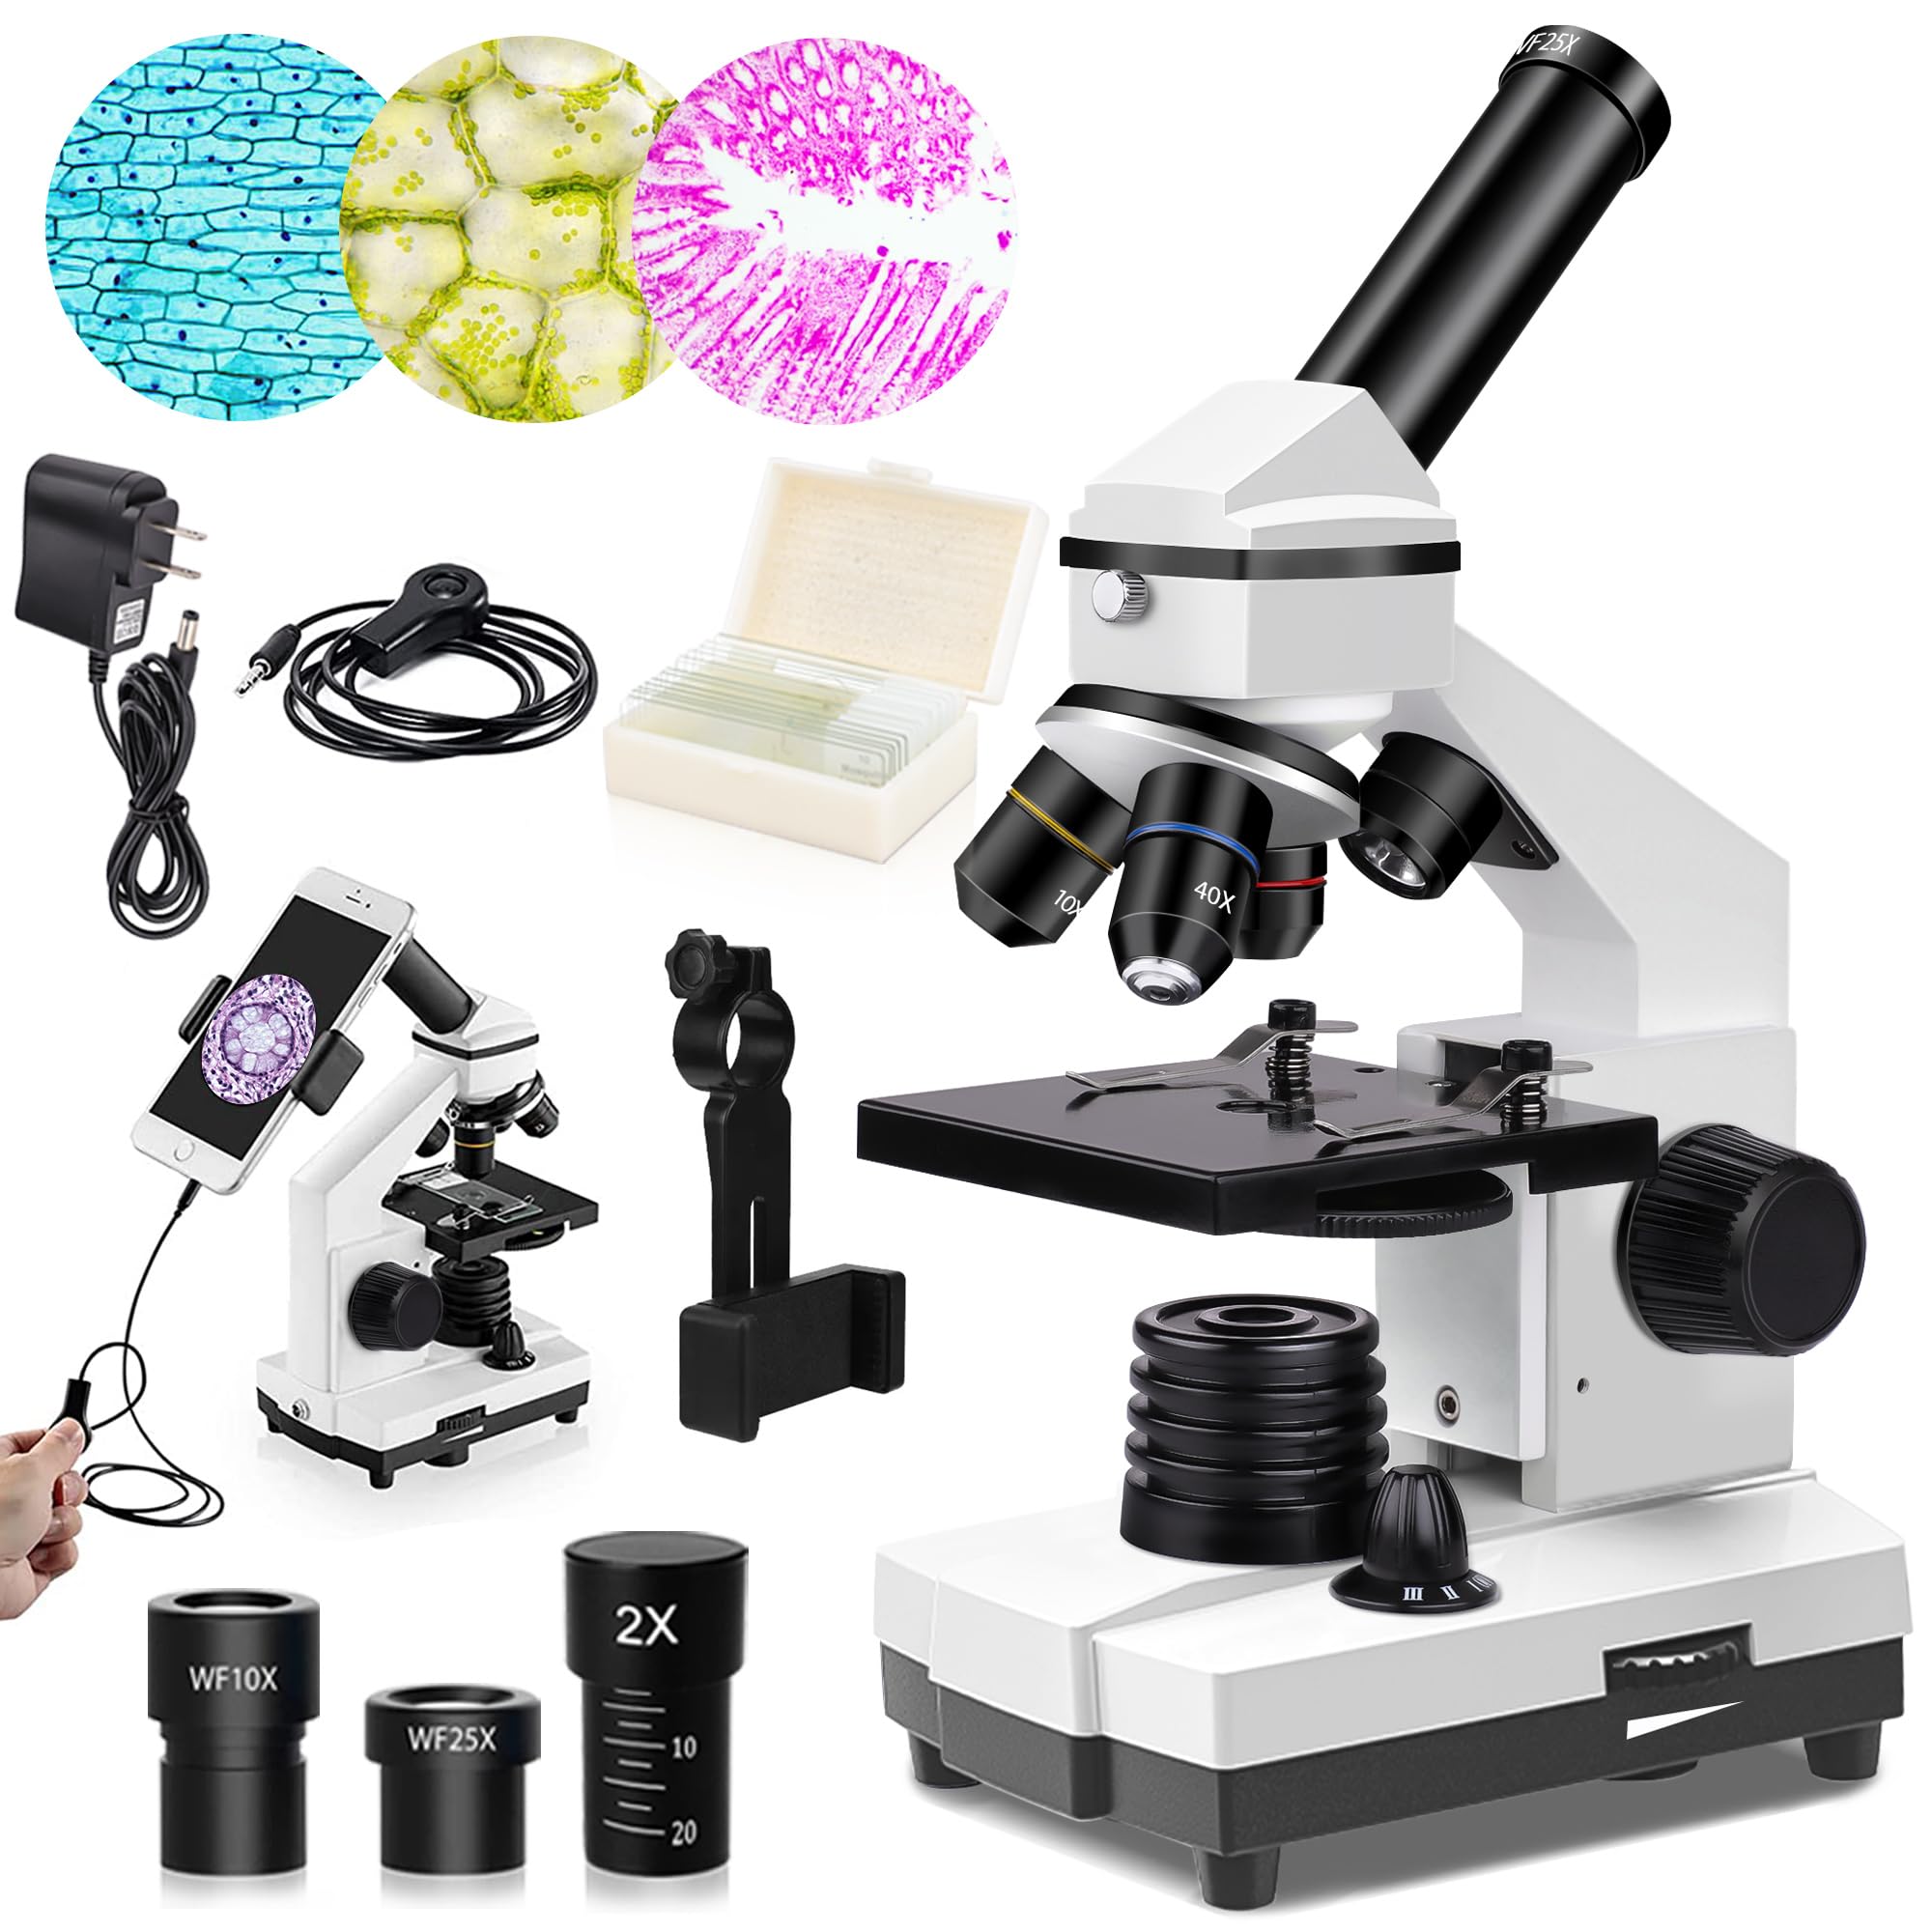 100X-4000X Microscopes for Kids Students Adults, Powerful Biological Microscopes for School Laboratory Home Education, with Microscope Slides Set, Phone Adapter